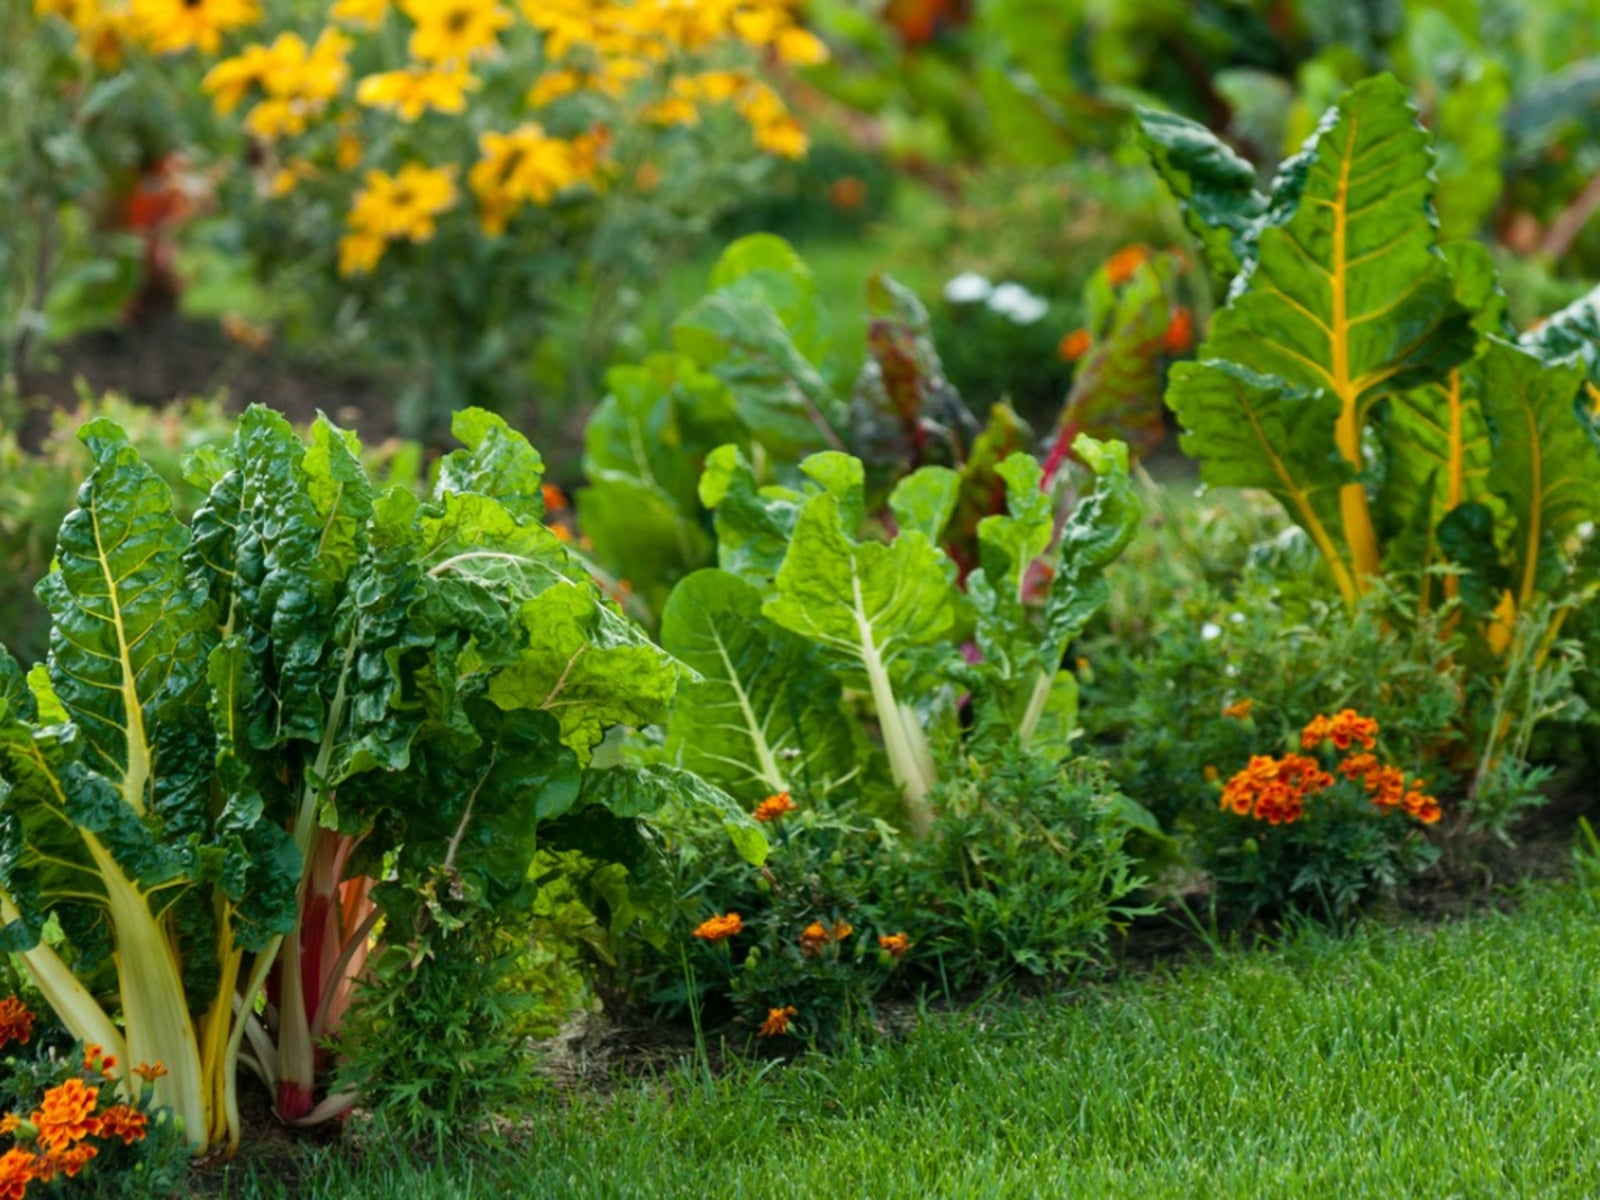 How To Mix Edible Plants In The Garden, Edible Landscaping Plants